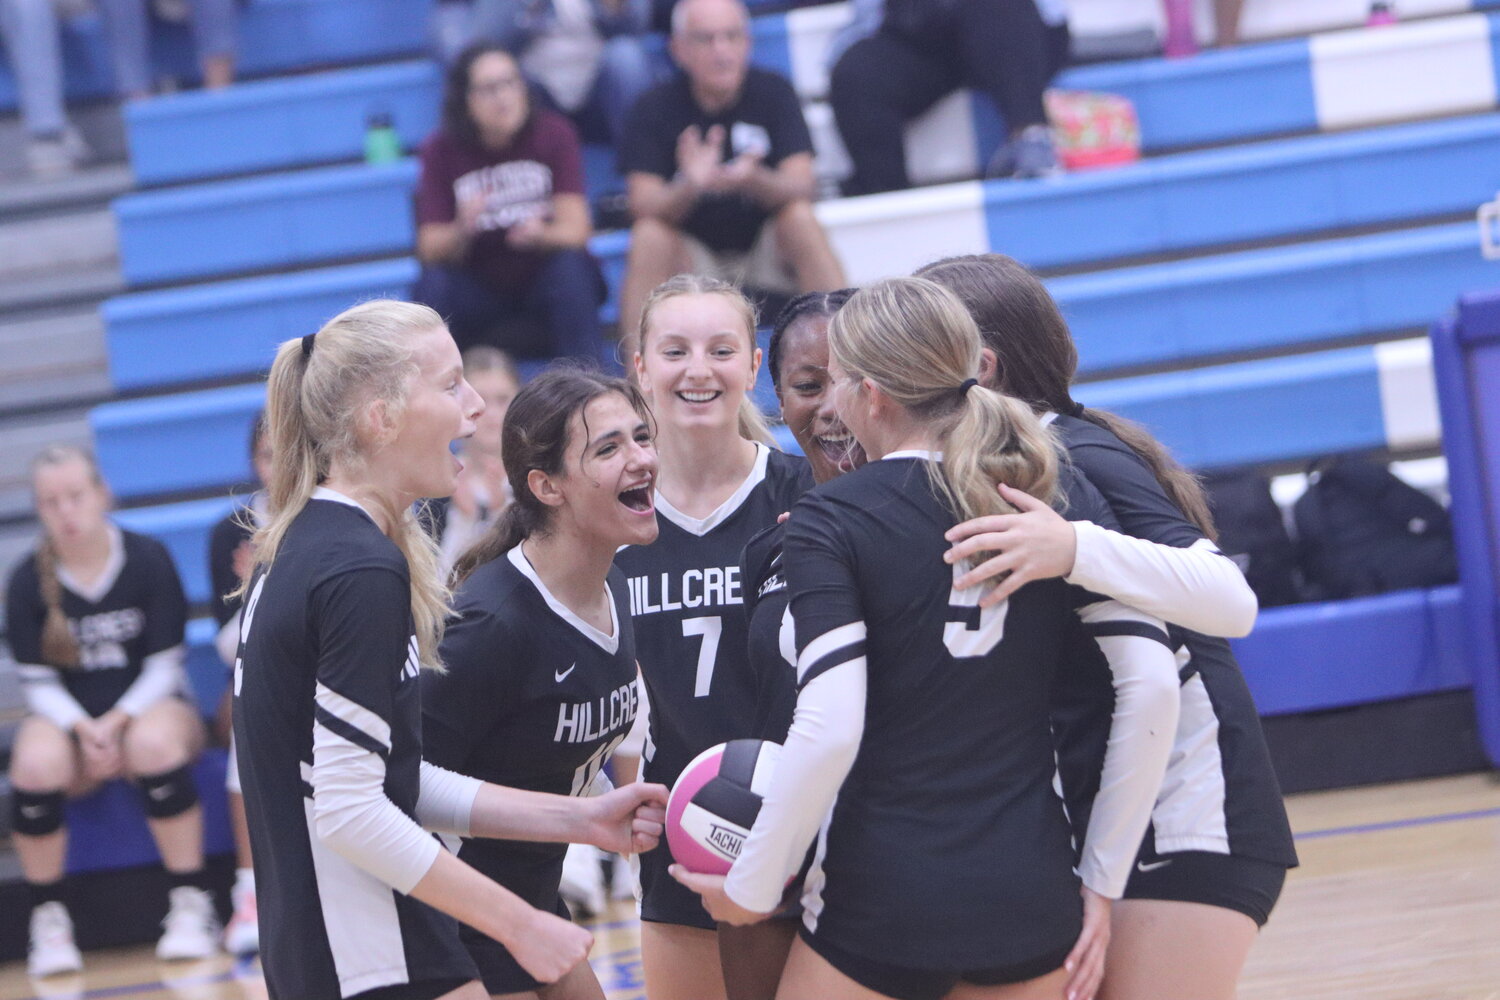 Hillcrest celebrates during a match at Columbus for the SEISC Tournament on Sept. 21.